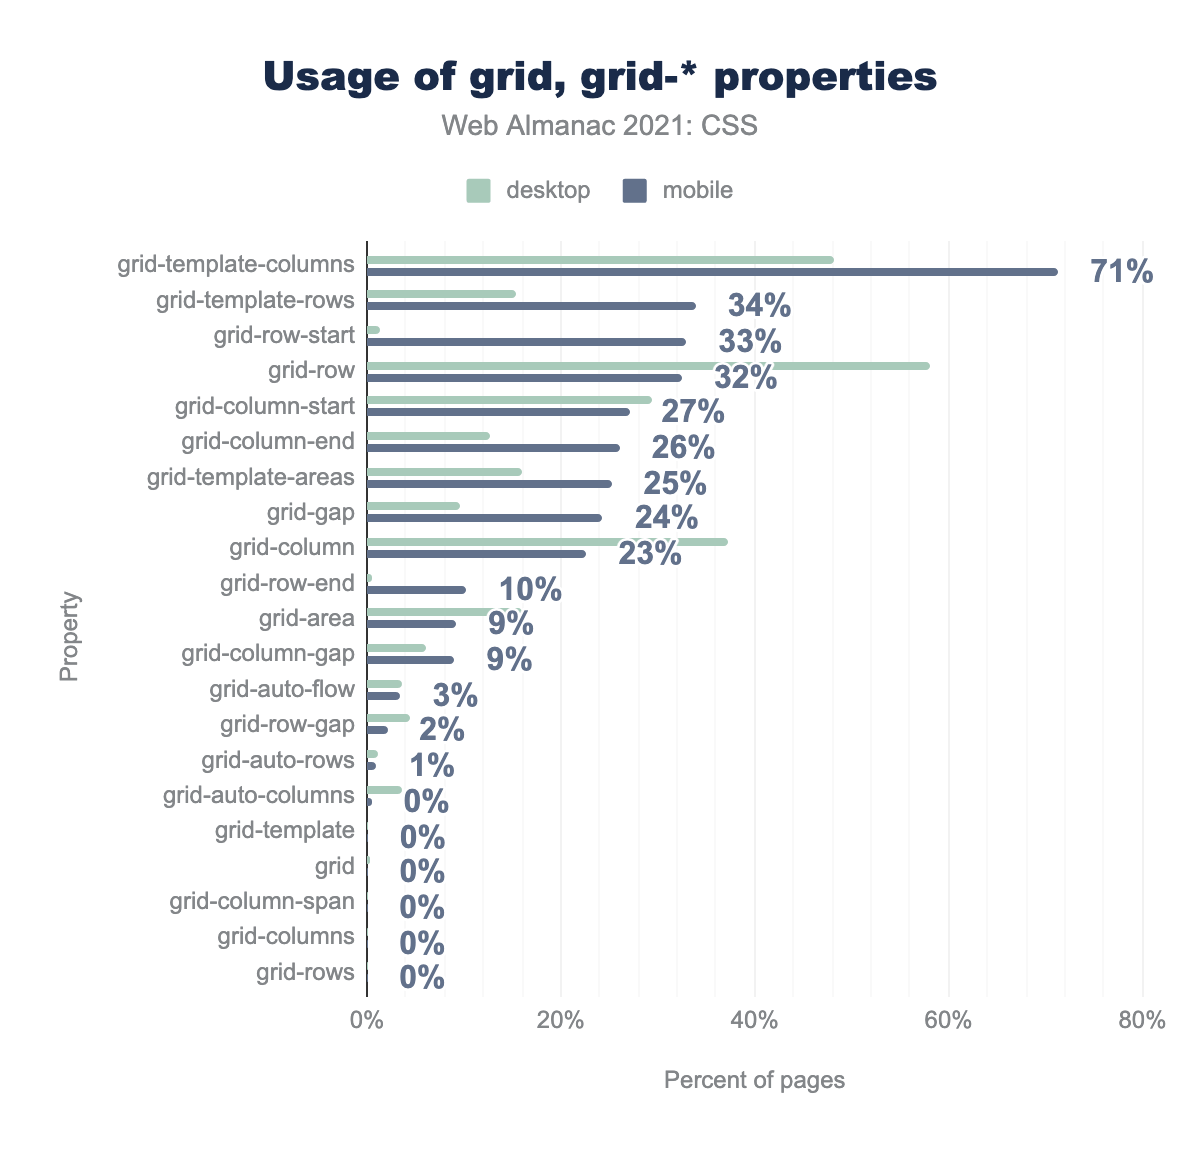 The most commonly used Grid-related properties.